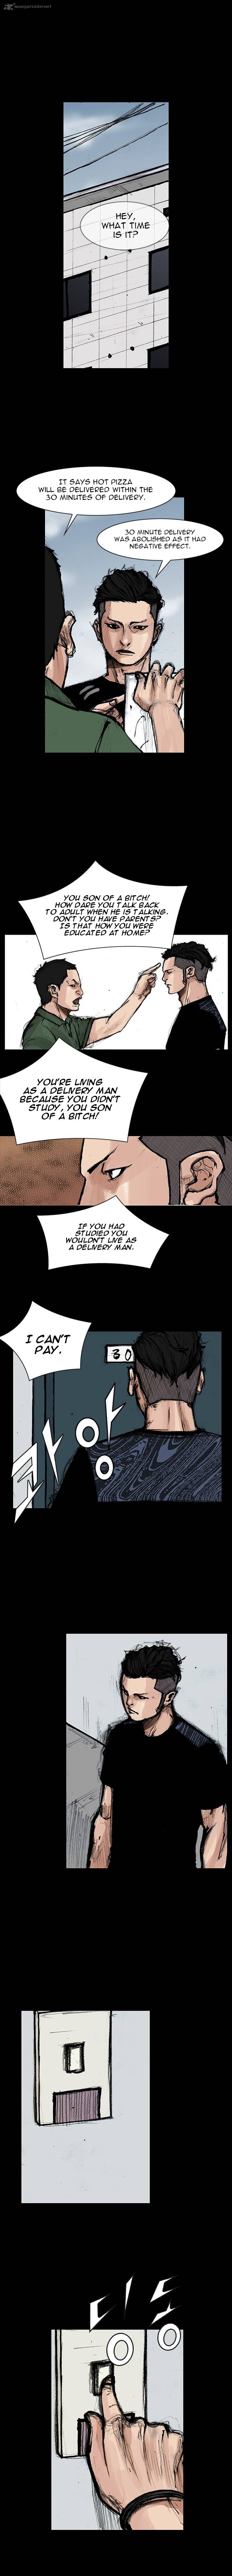 Dokgo 2 Chapter 3 Page 6